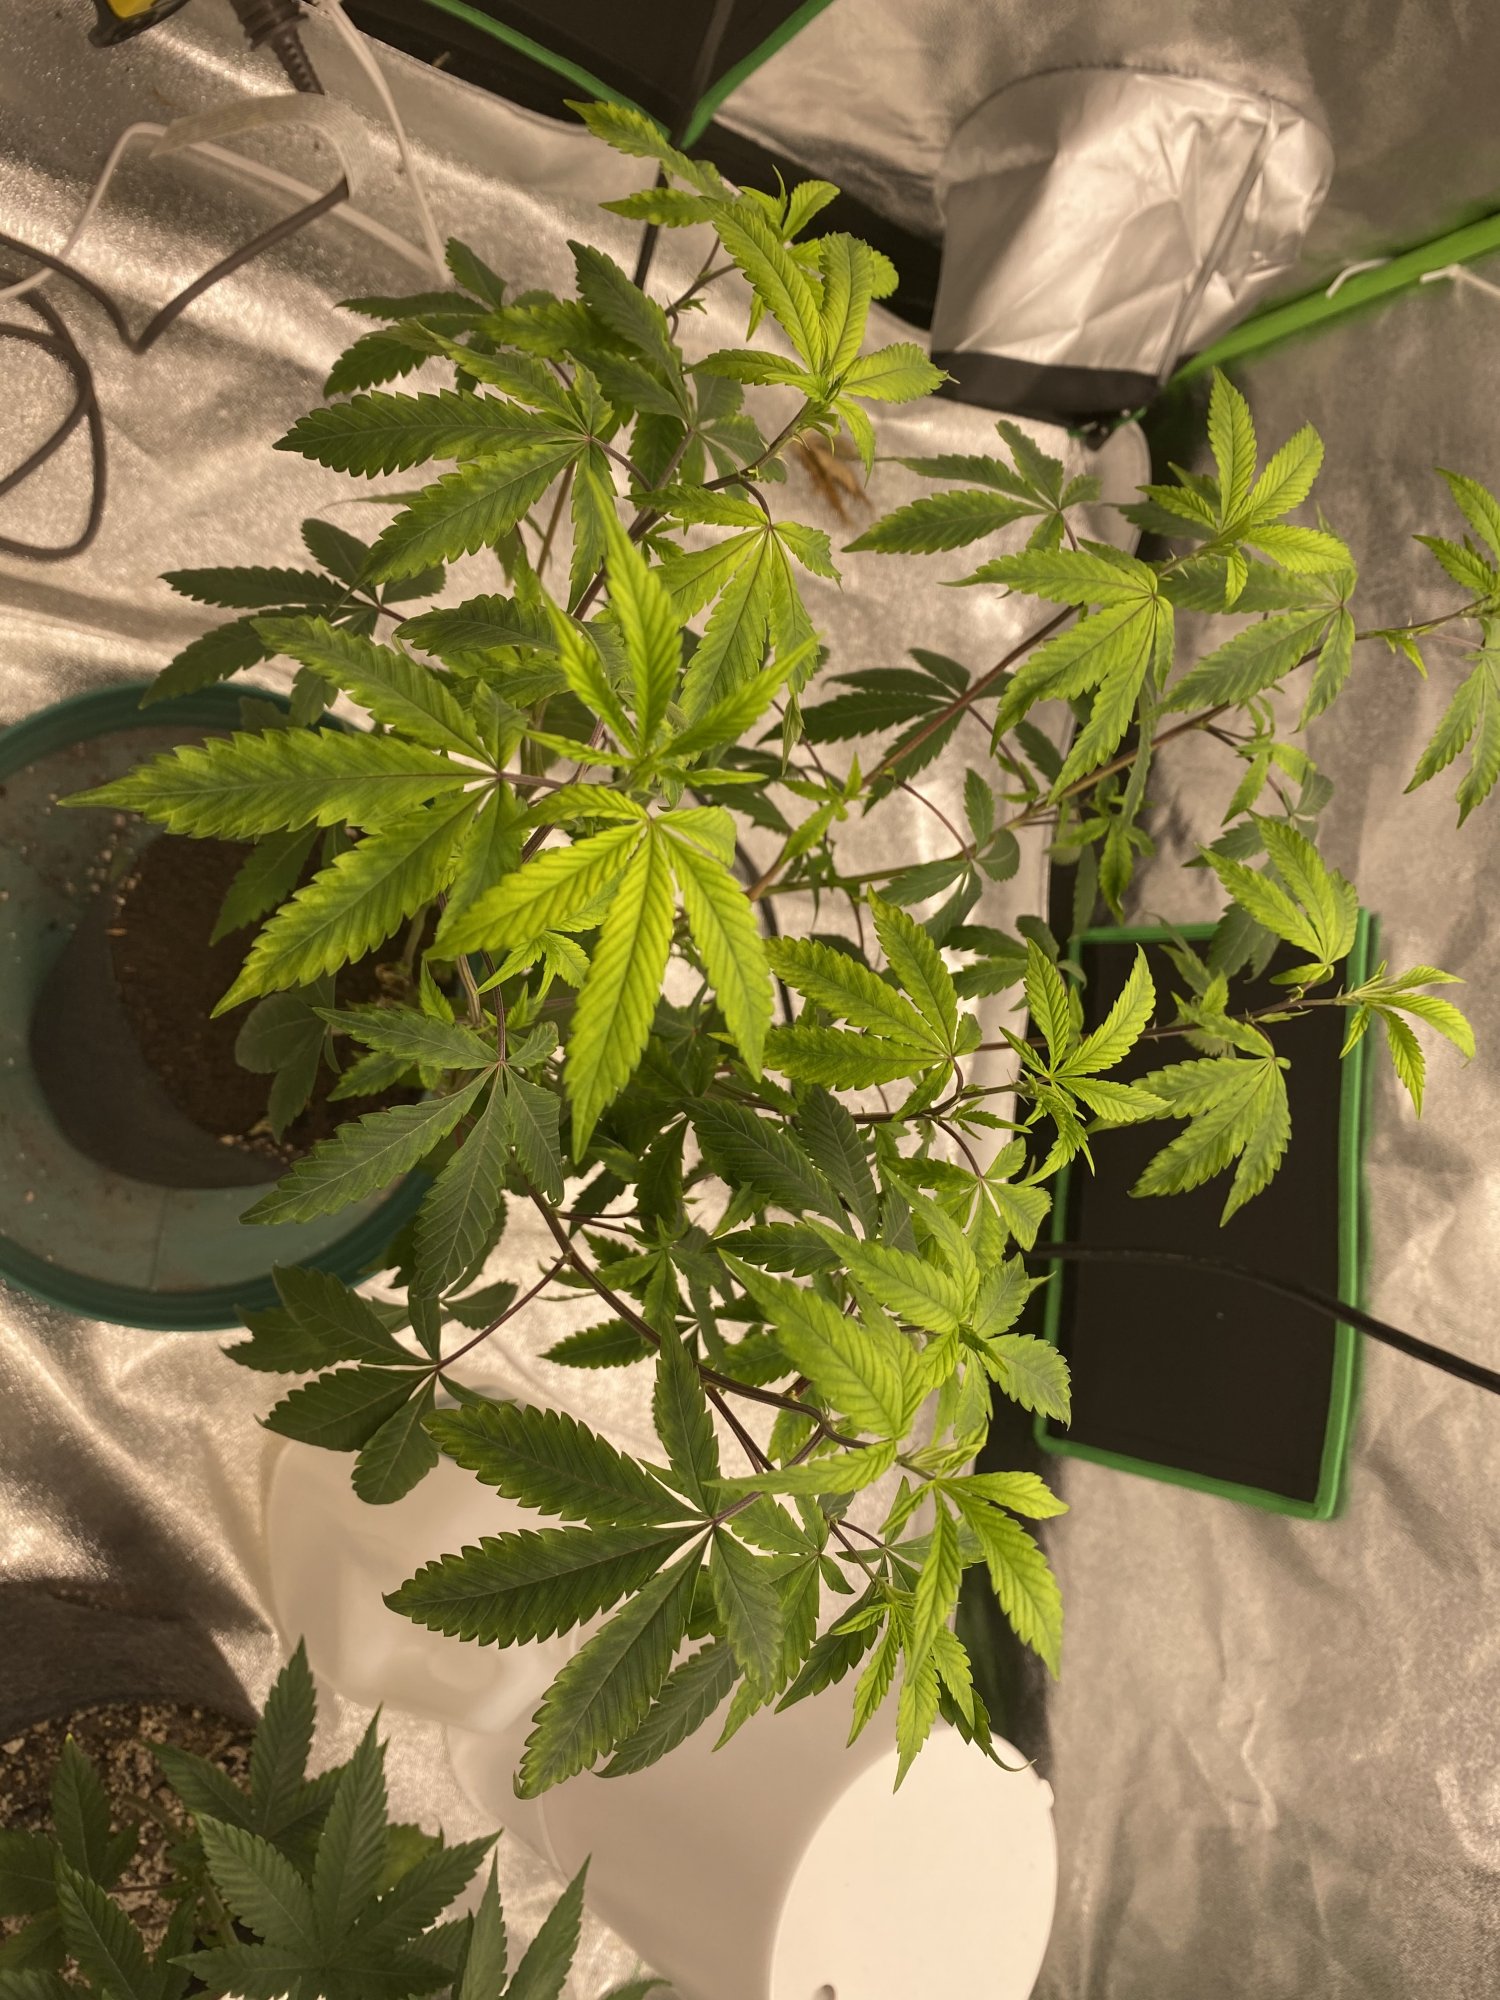 In veg and leaves are very miscolored is this light stress or something else